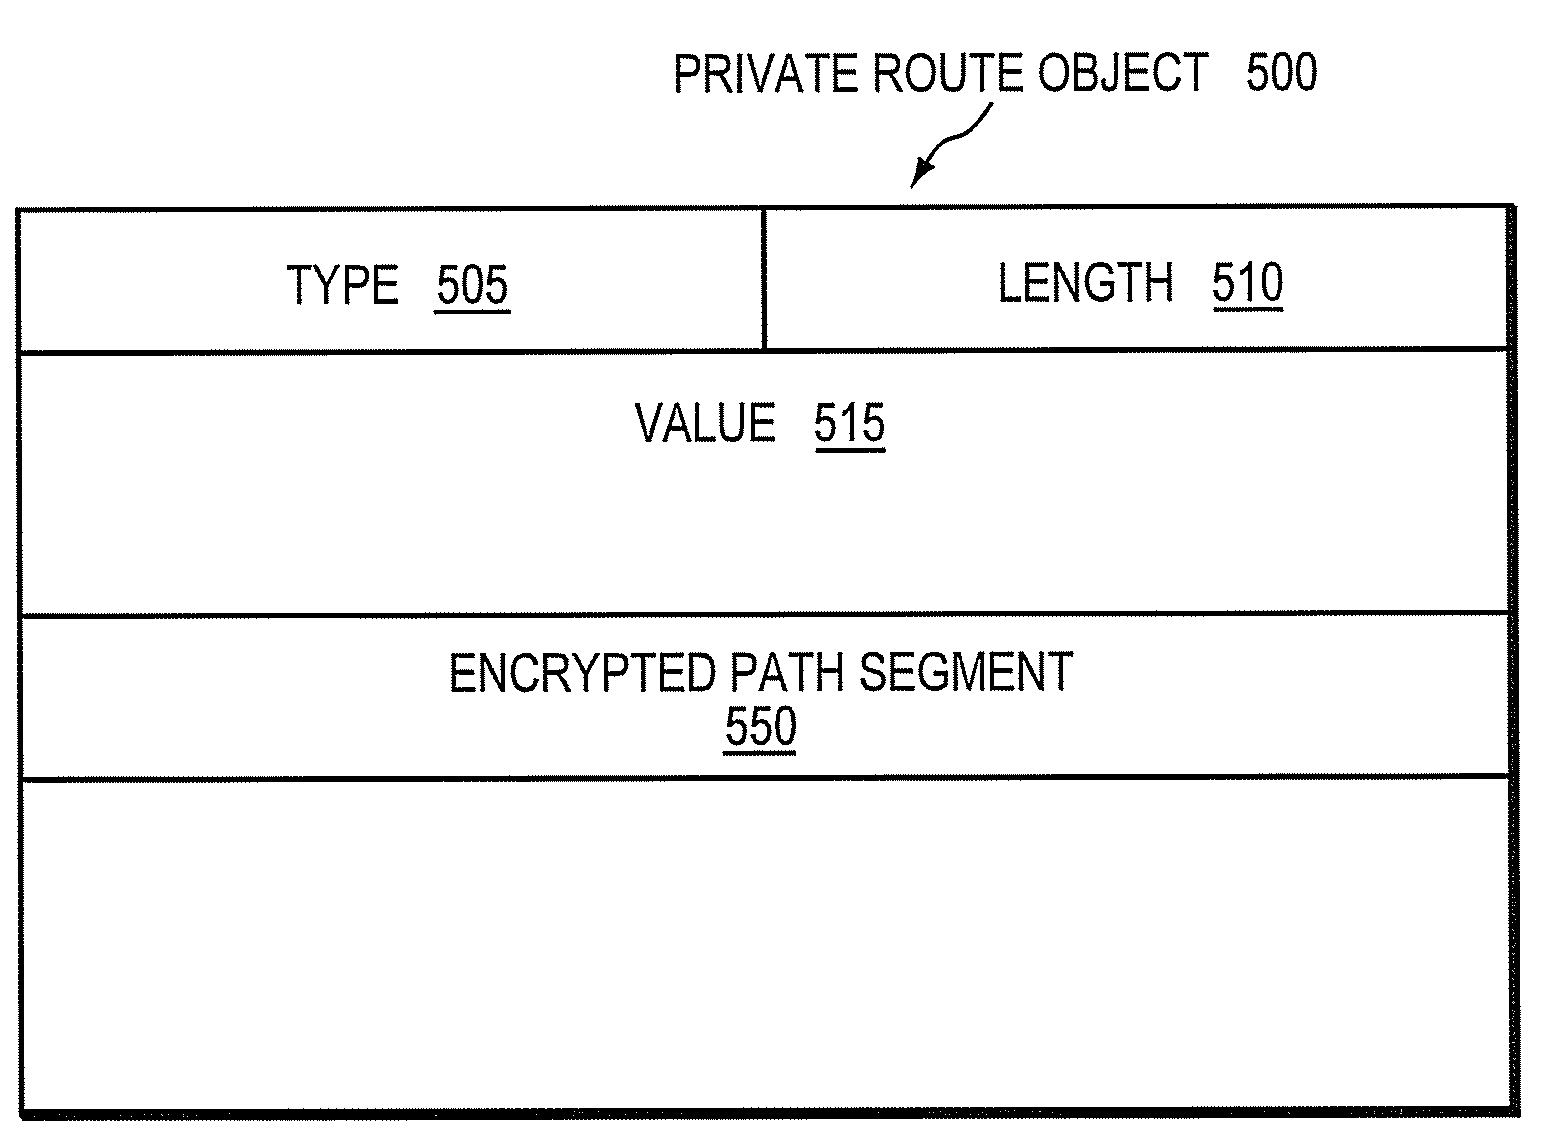 System and method for retrieving computed paths from a path computation element using encrypted objects